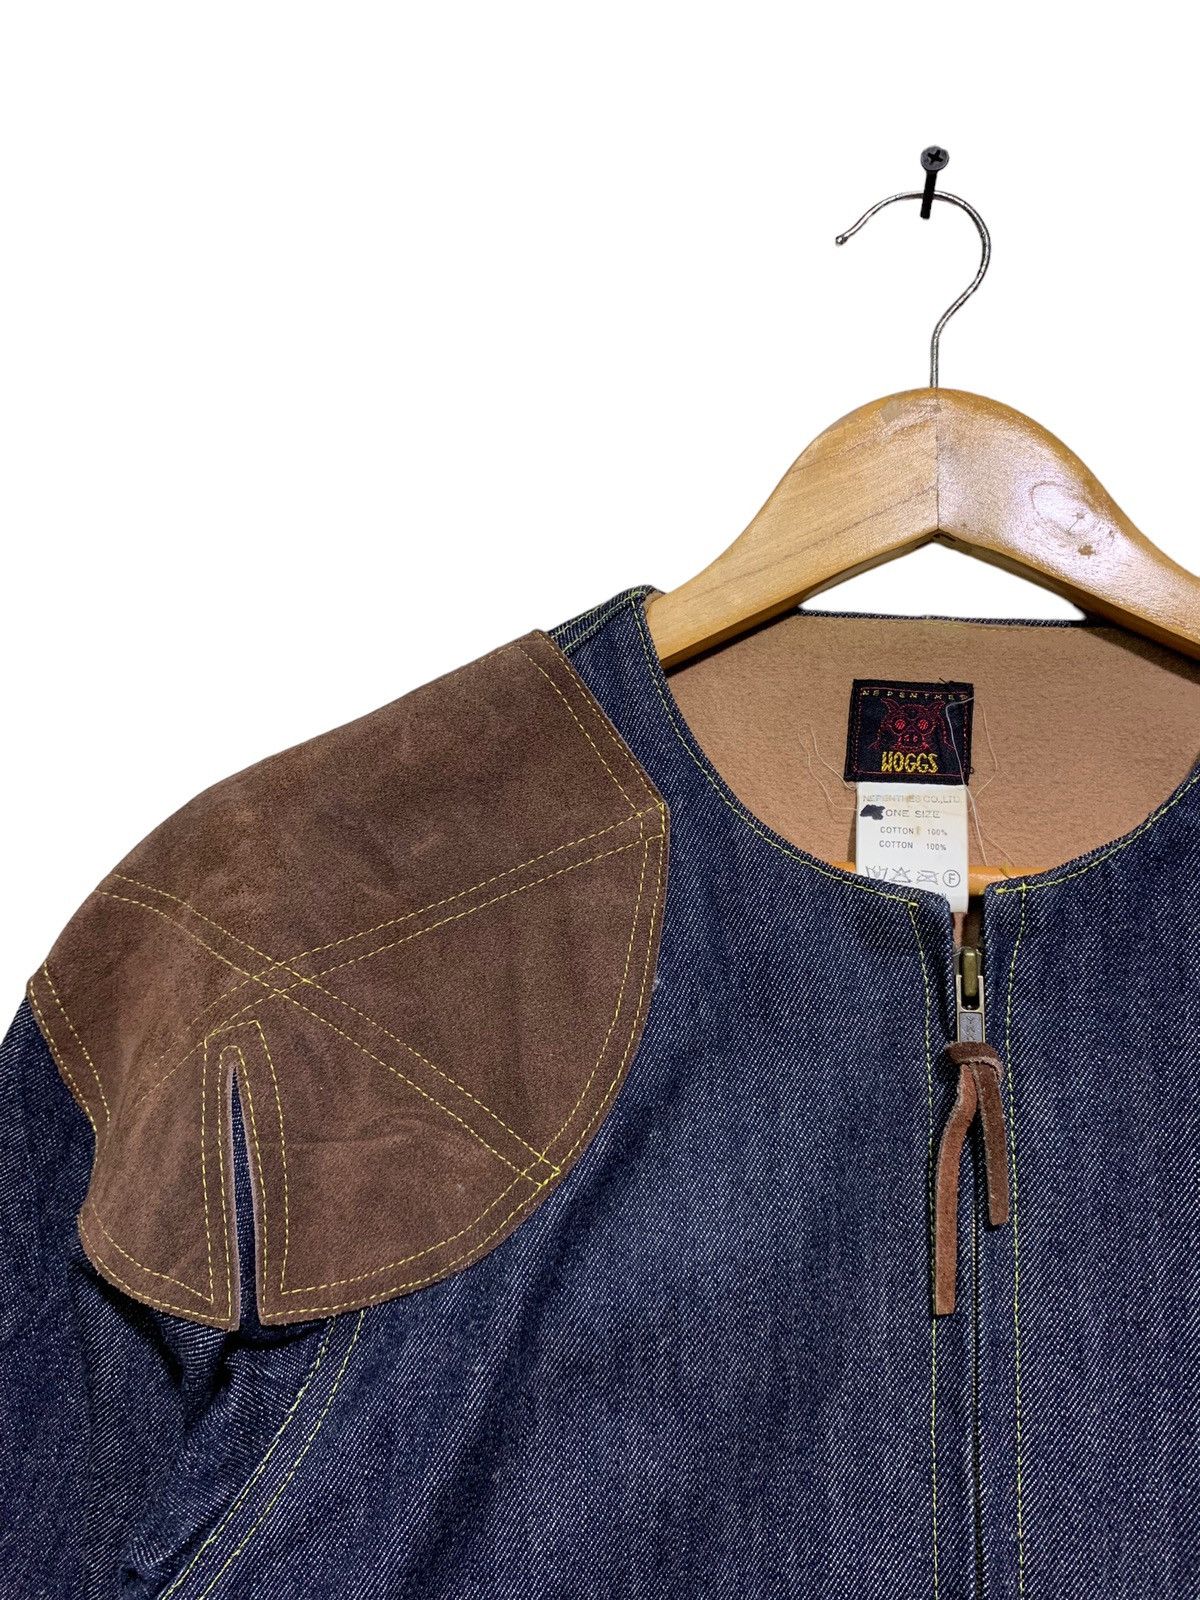 🔥NEPENTHES DENIM JACKETS WITH LEATHER PATCHWORK - 6